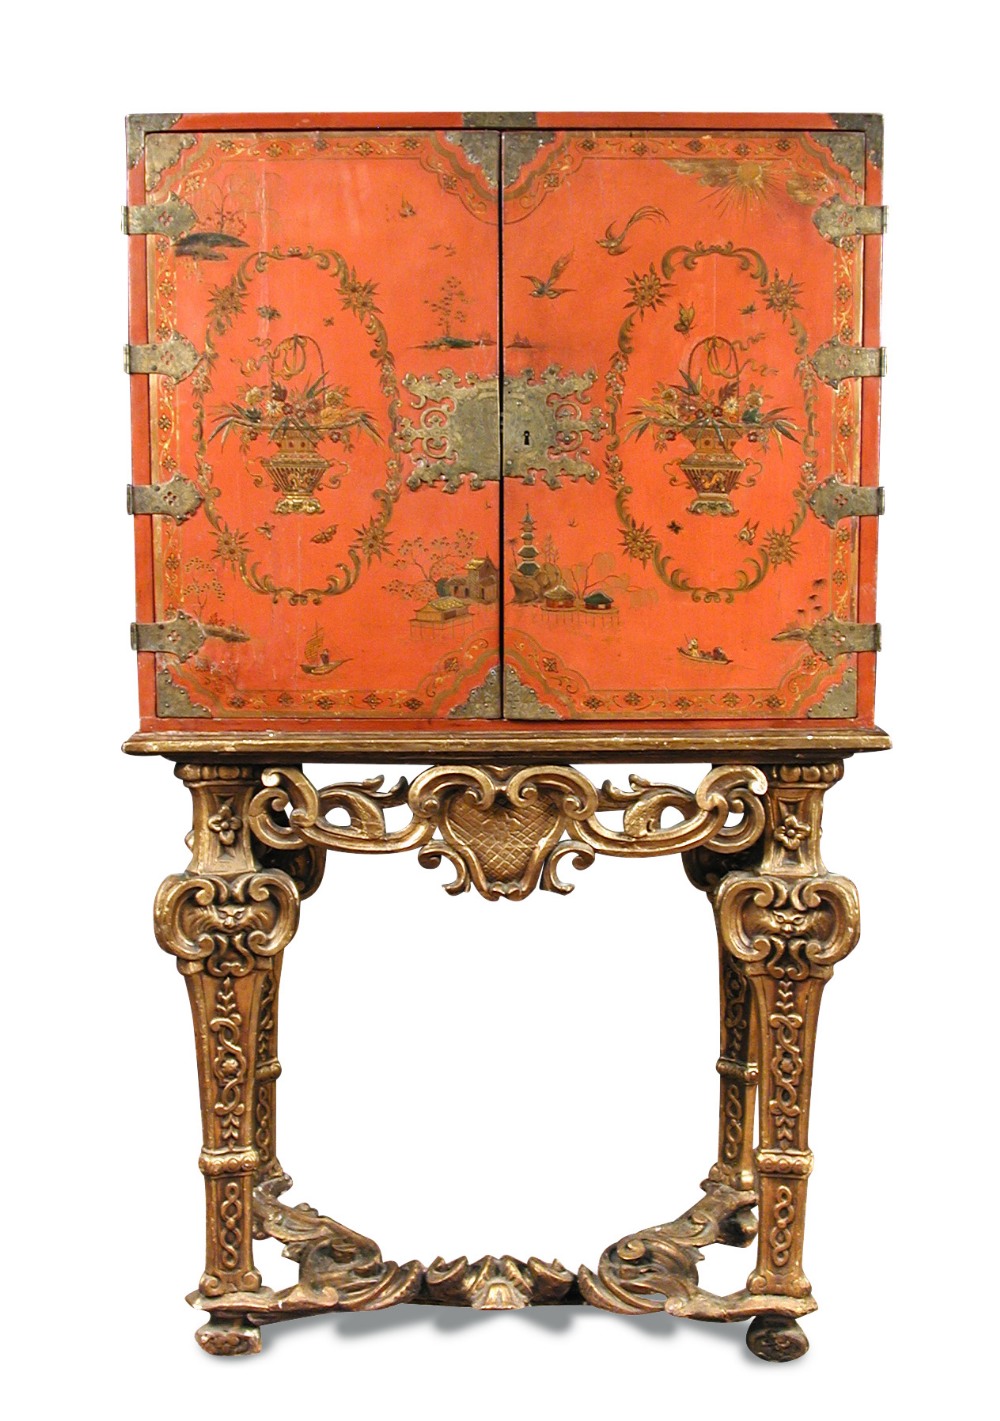 An 18th century Chinese red lacquer cabinet on a giltwood stand, decorated with a traditional